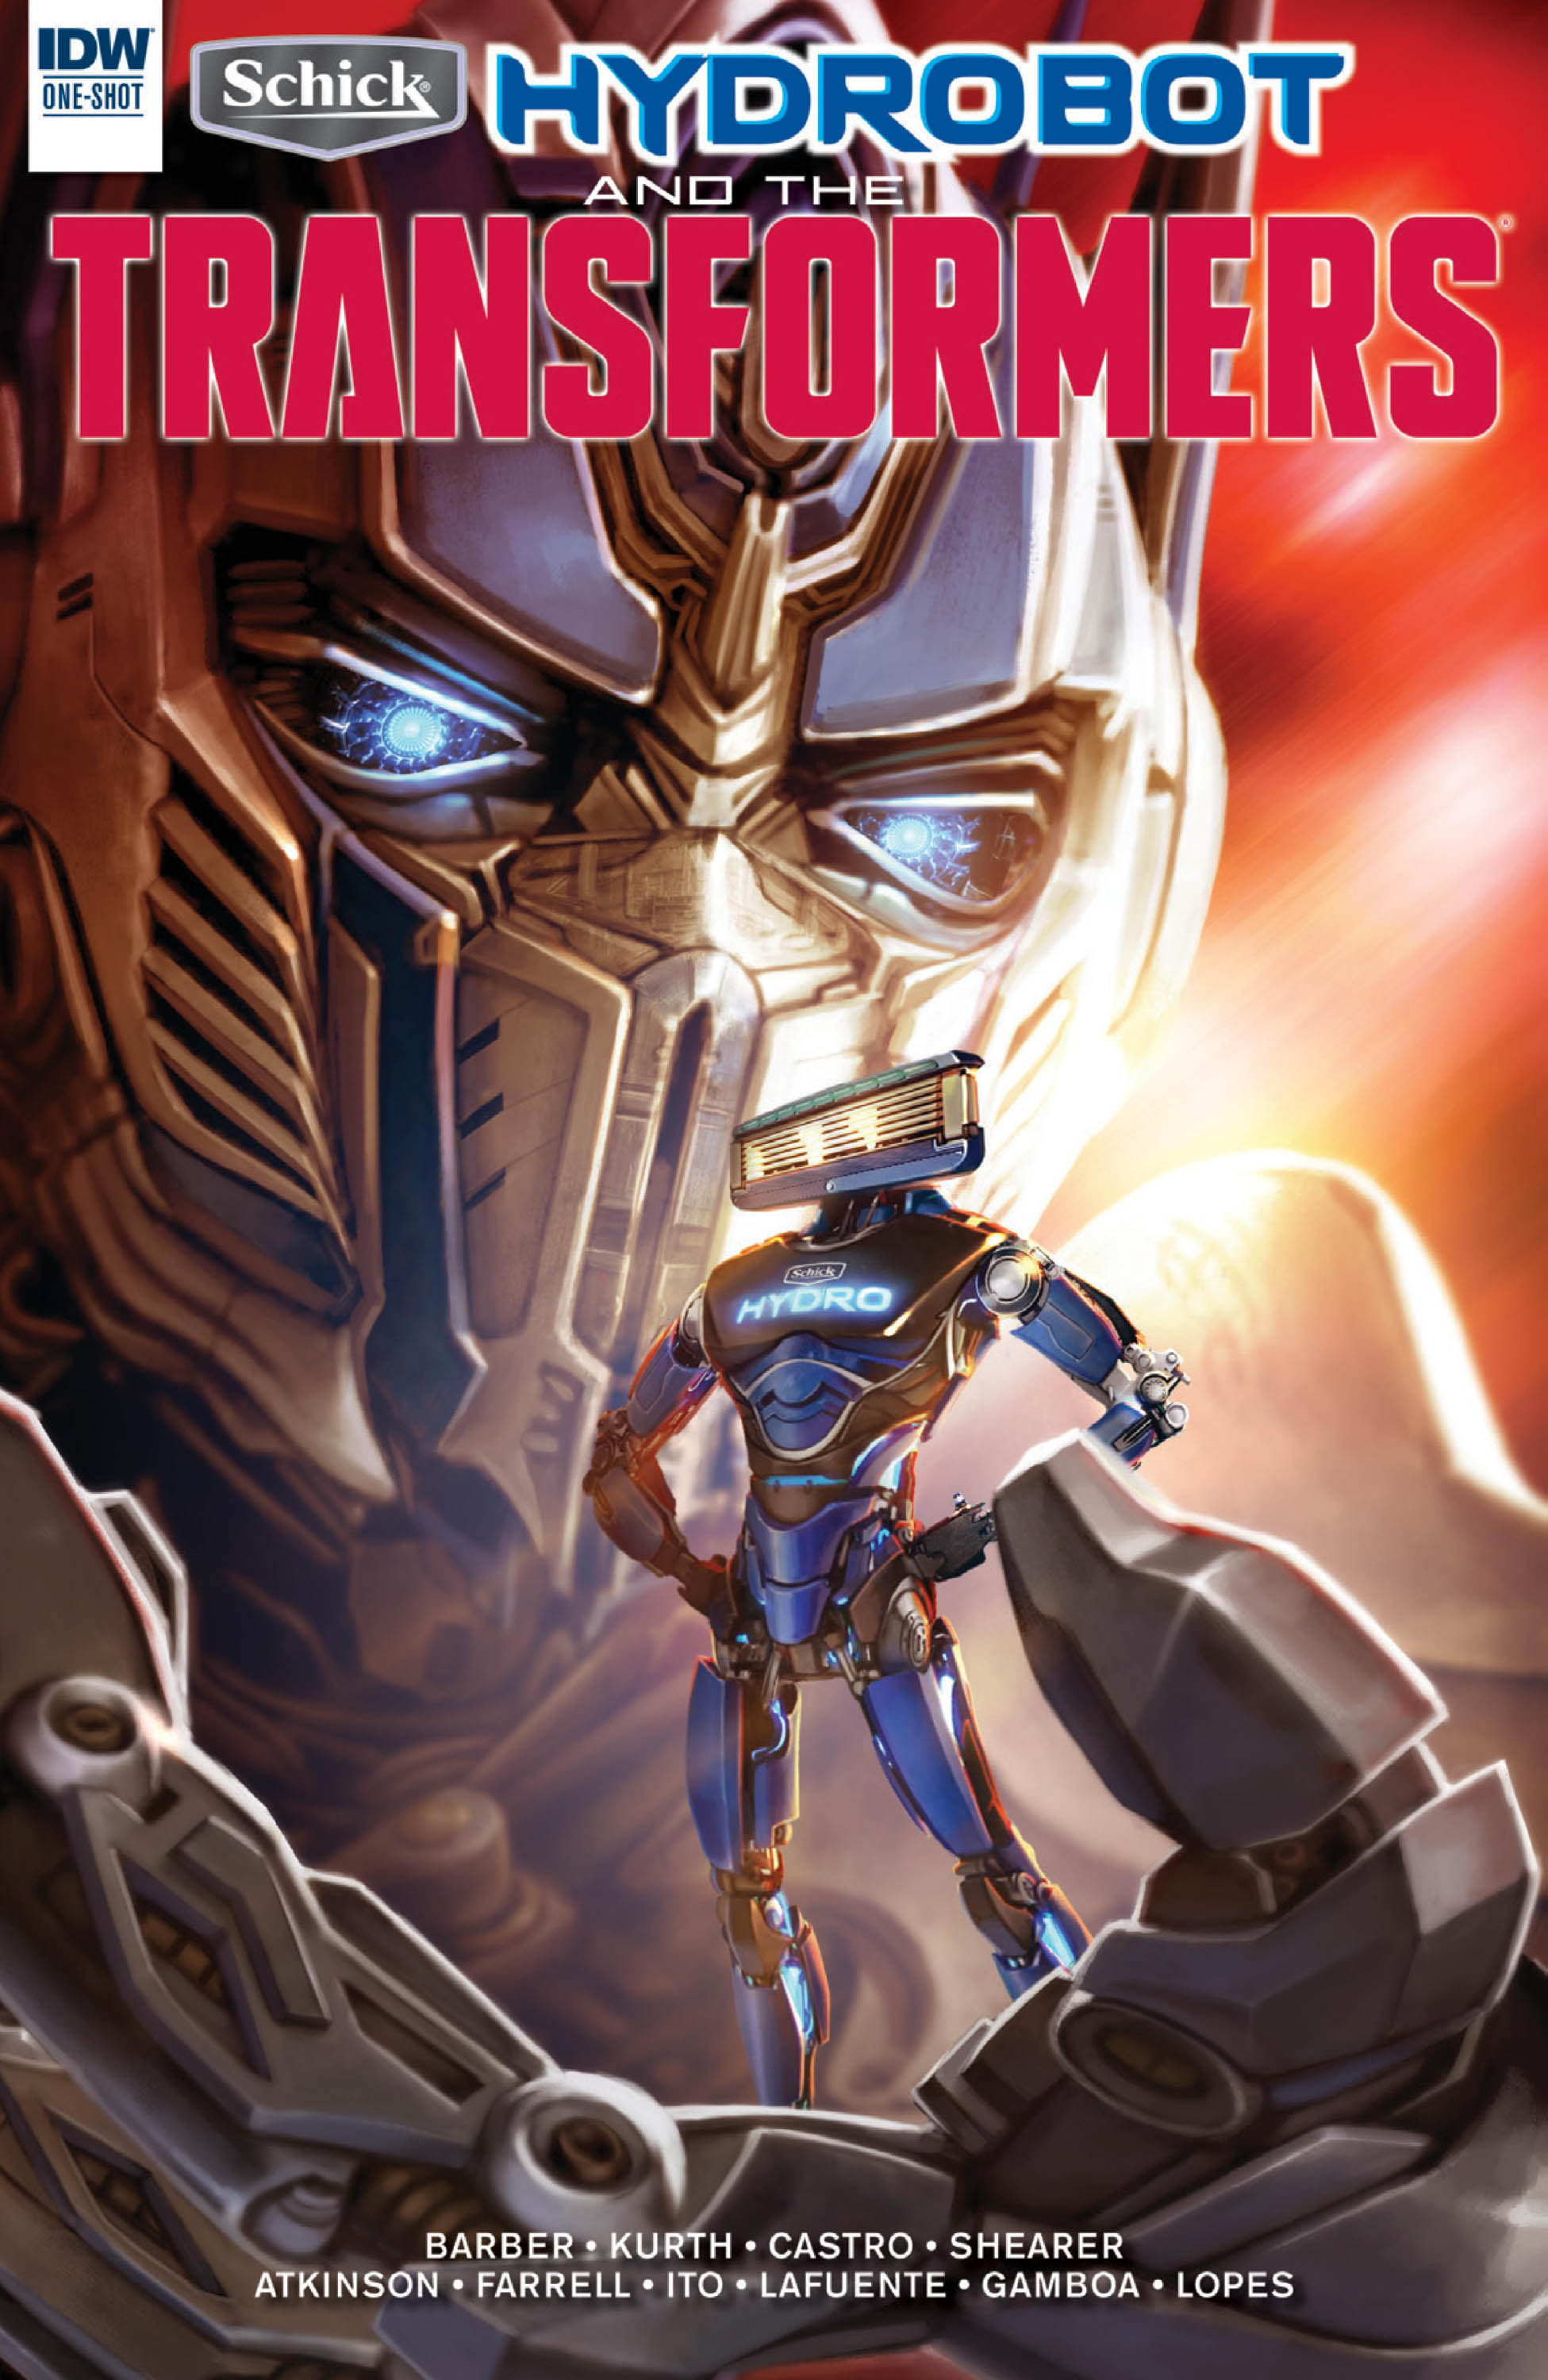 Read online Schick Hydrobot & the Transformers: A New Friend comic -  Issue # Full - 1